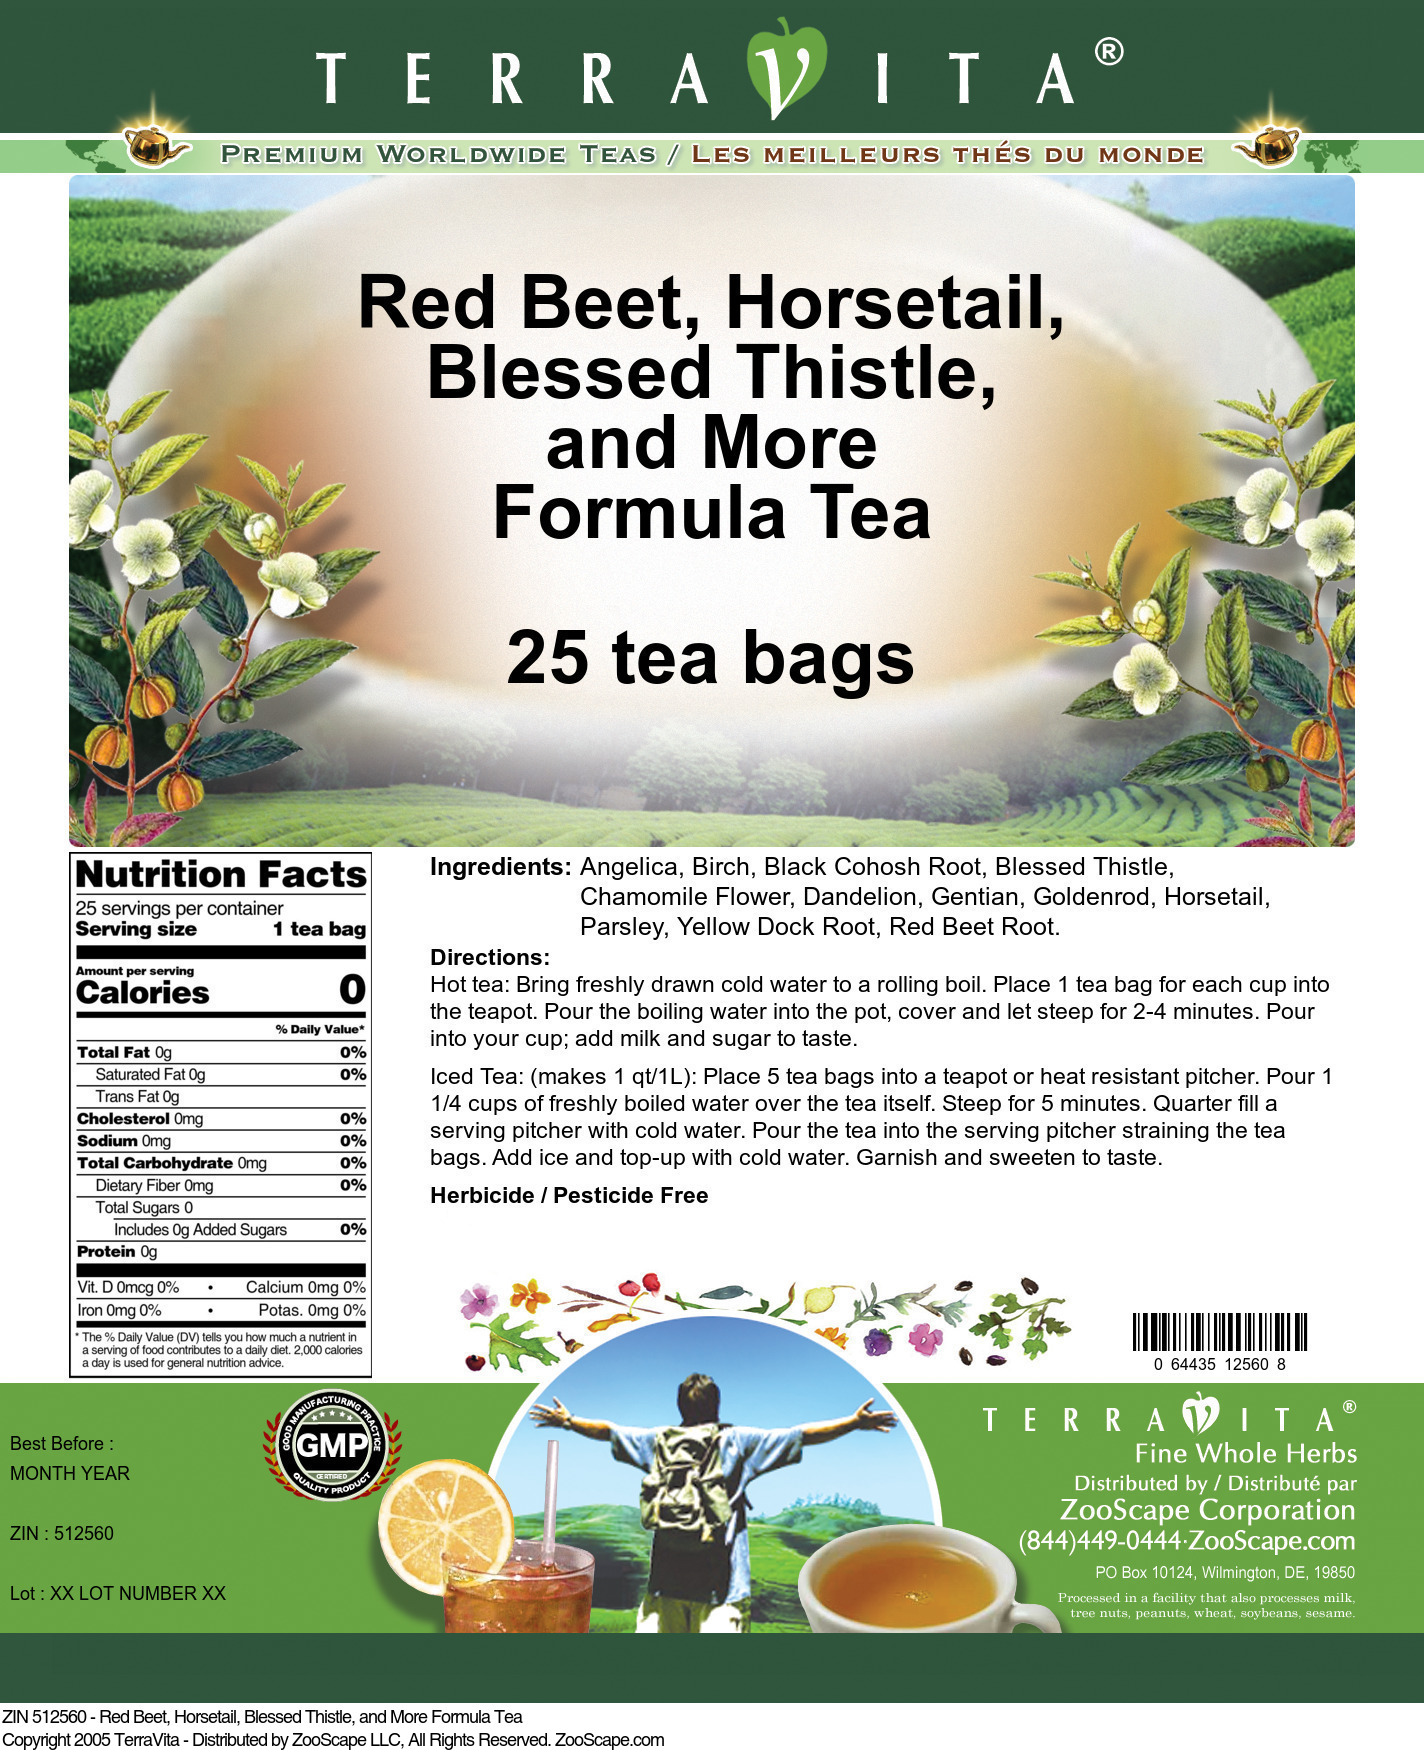 Red Beet, Horsetail, Blessed Thistle, and More Formula Tea - Label